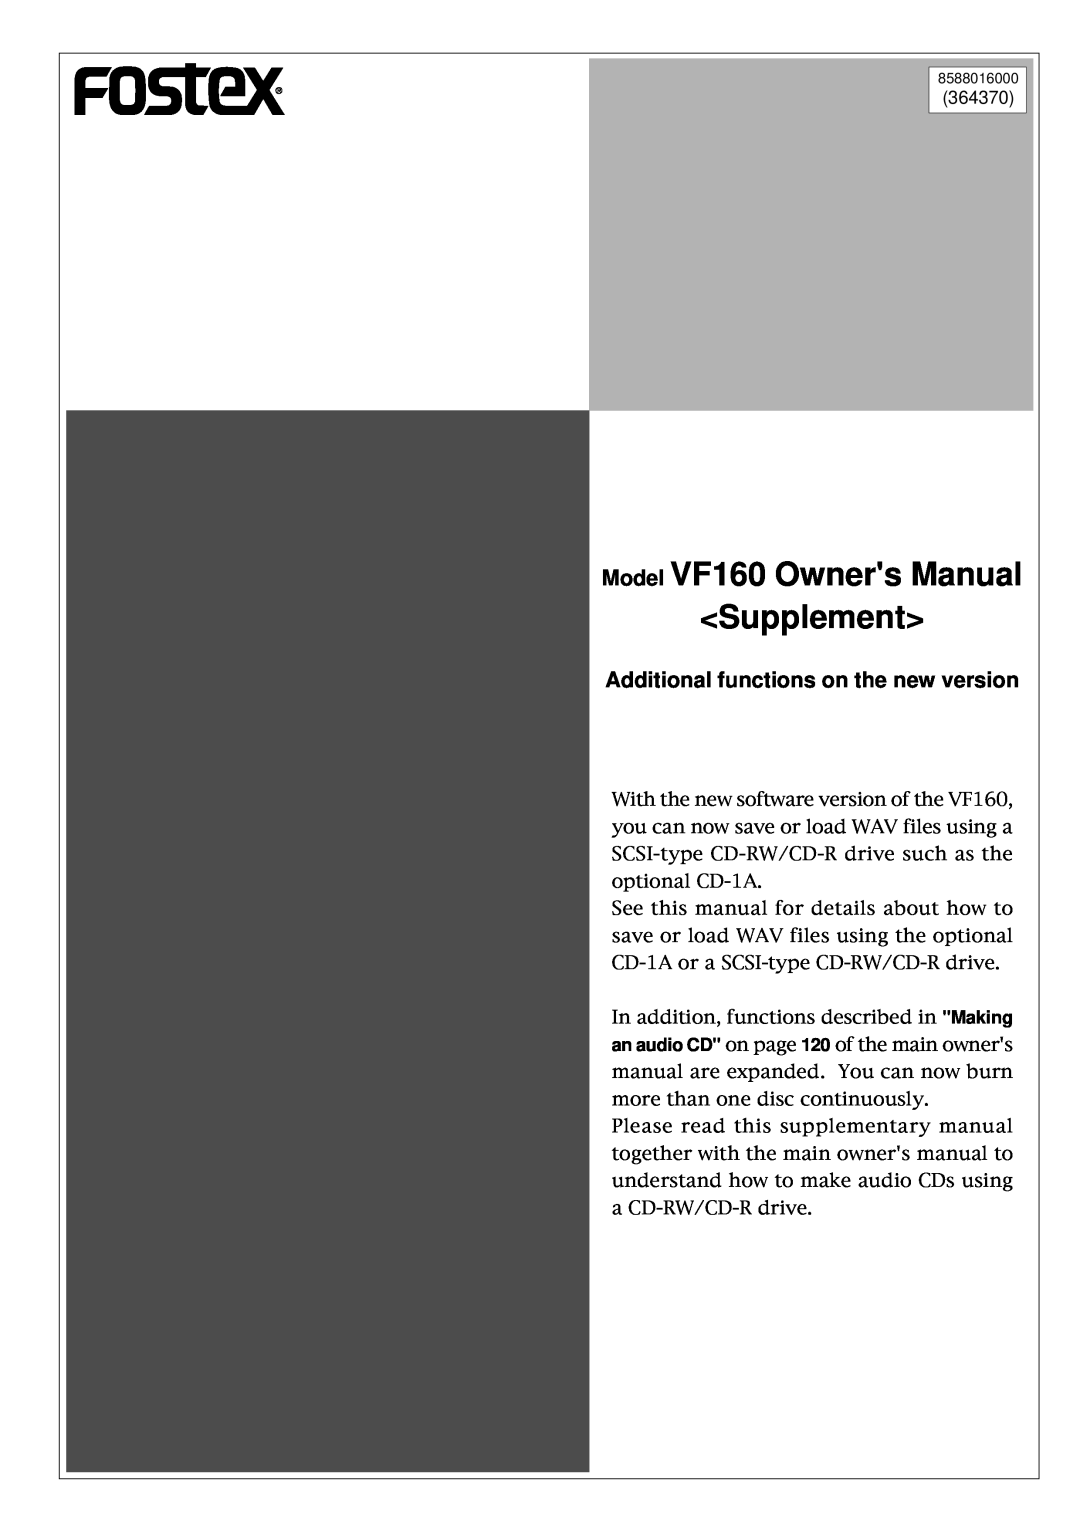 Fostex VF160 owner manual Additional functions on the new version 